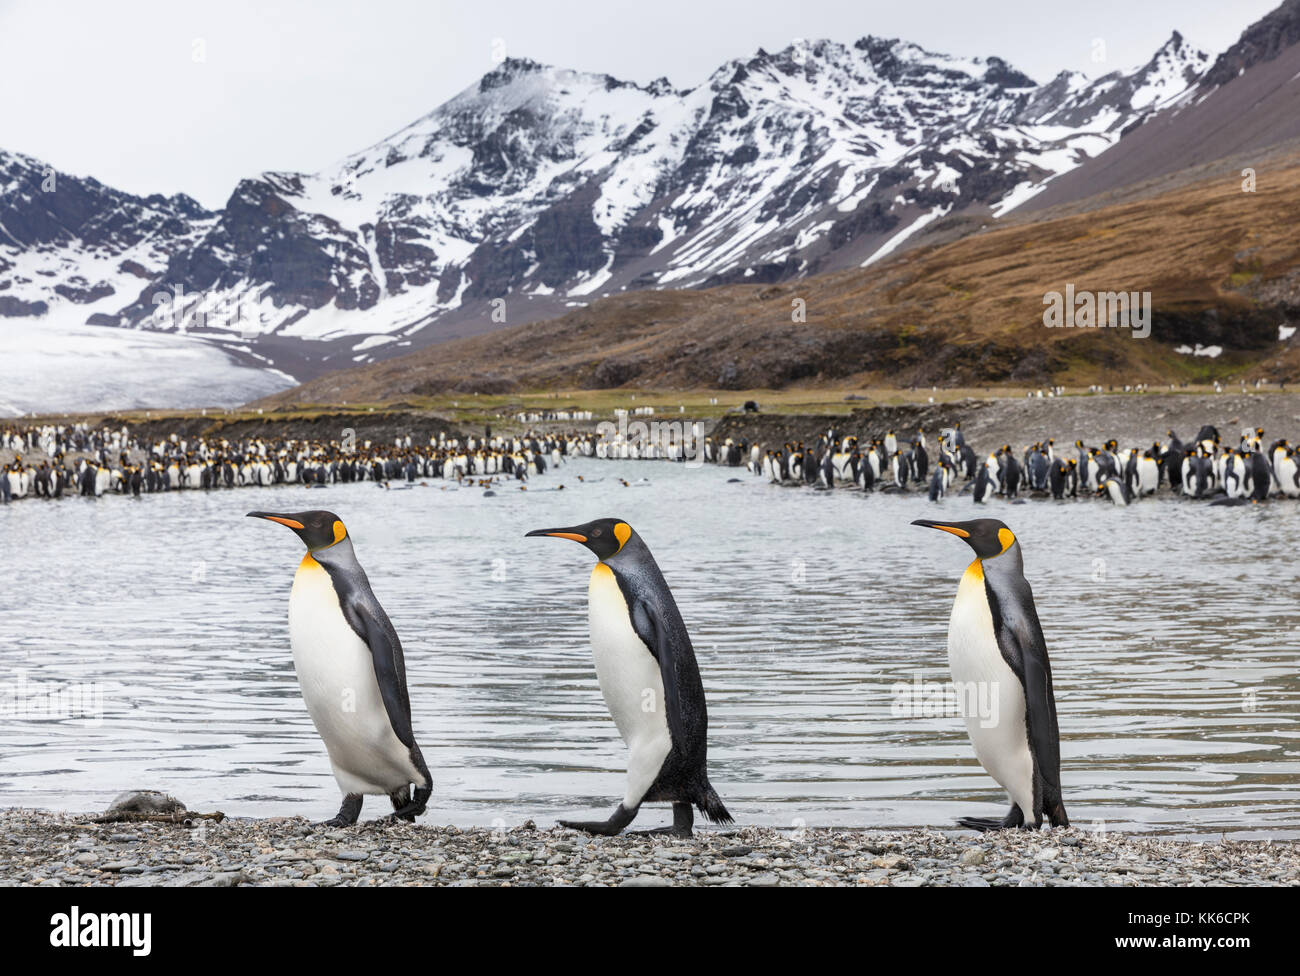 Three king penguins walking on beach shingle with penguin colony, glacier, and snow capped mountains of St Andrew's Bay, South Georgia Island in backg Stock Photo